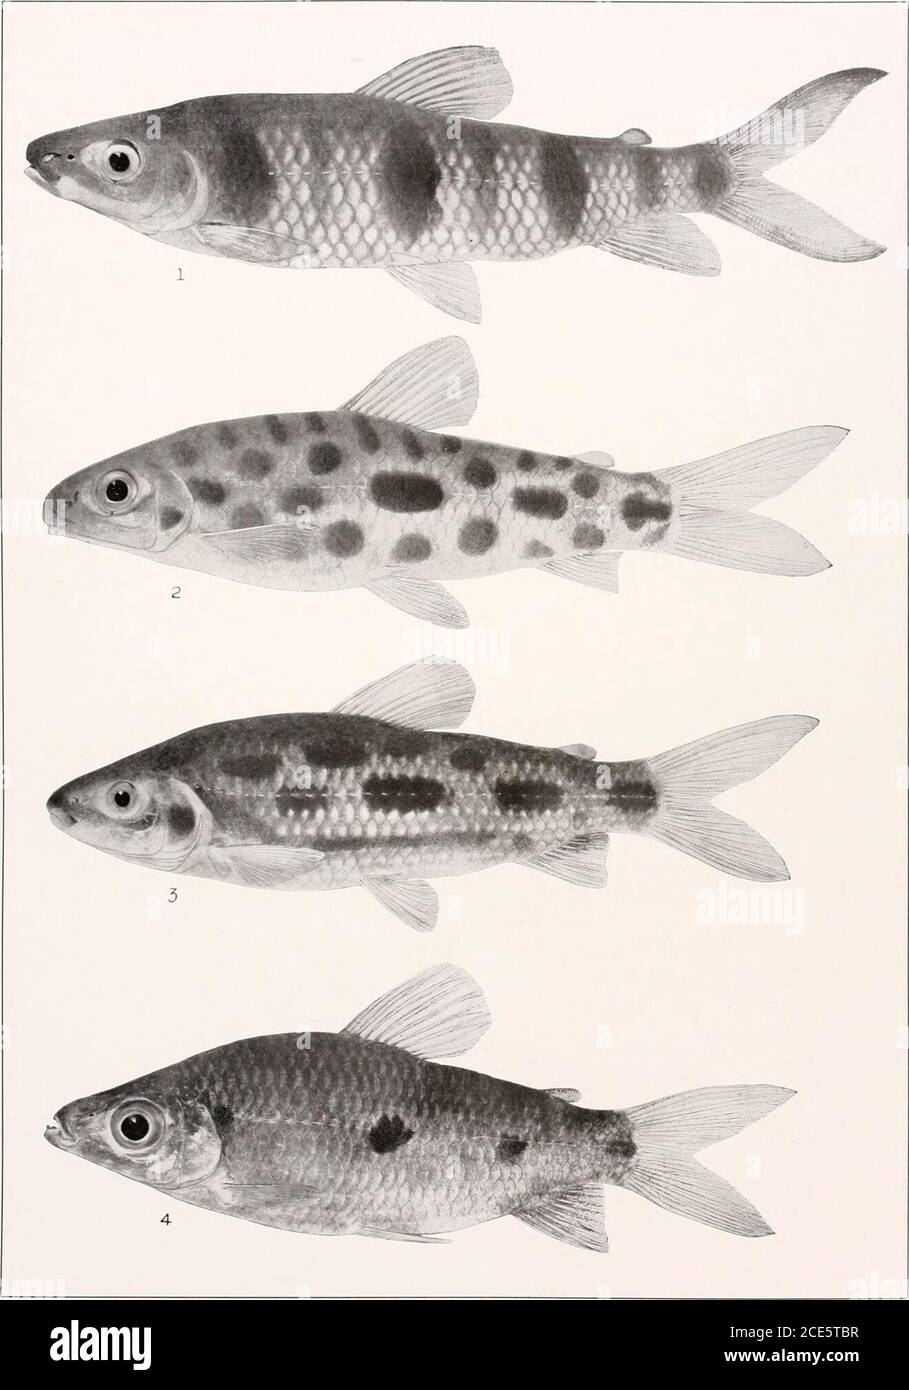 . The freshwater fishes of British Guiana, including a study of the ecological grouping of species and the relation of the fauna of the plateau to that of the lowlands . Memoirs Carnegie Museum, Vol. V. Plate XLI1. 1. Leporinus dliemus Eigenmann. (Type.) 200 nun. No. 1N27. 2. Leporinus maculatus MIlleb amiTroschel. 73 mm. I. I. No. 12.127. 3. Leporinus granti Eigenmann. (Type.) 144 mm. No. 1851.4. Leporinusfriderici (Bloch). 04 mm. No. 2214. Memoirs Carnegie Museum, Vol. V. Plate XLIV. Stock Photo